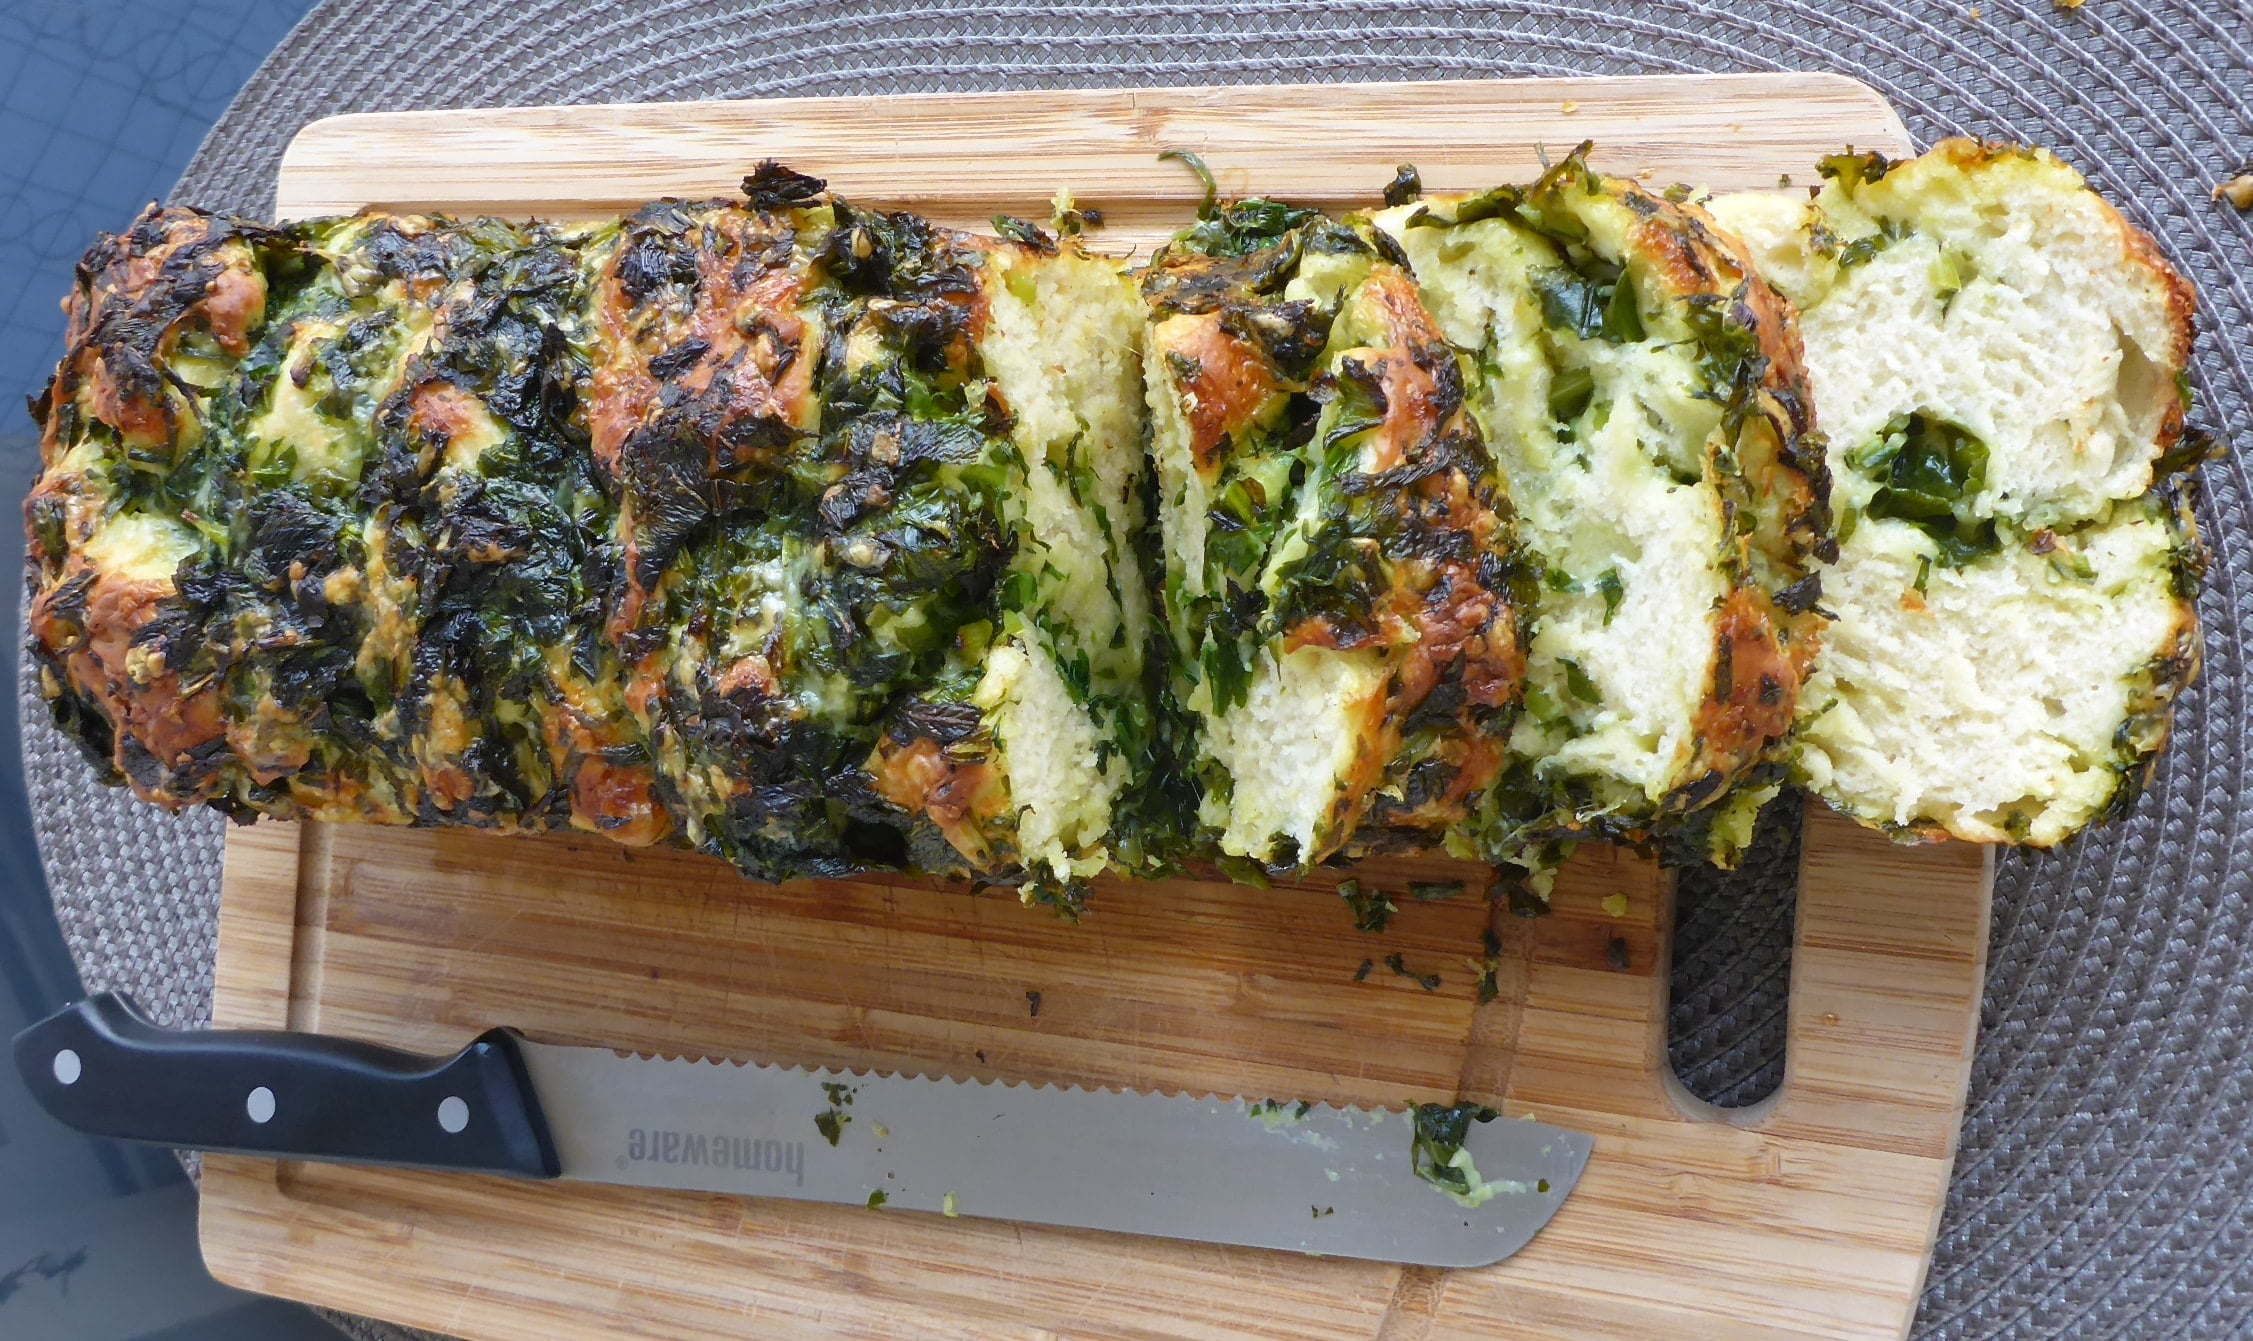 Freshly Baked Wild Garlic Bread on a Wooden Cutting Board, Sliced and Ready to Savor.